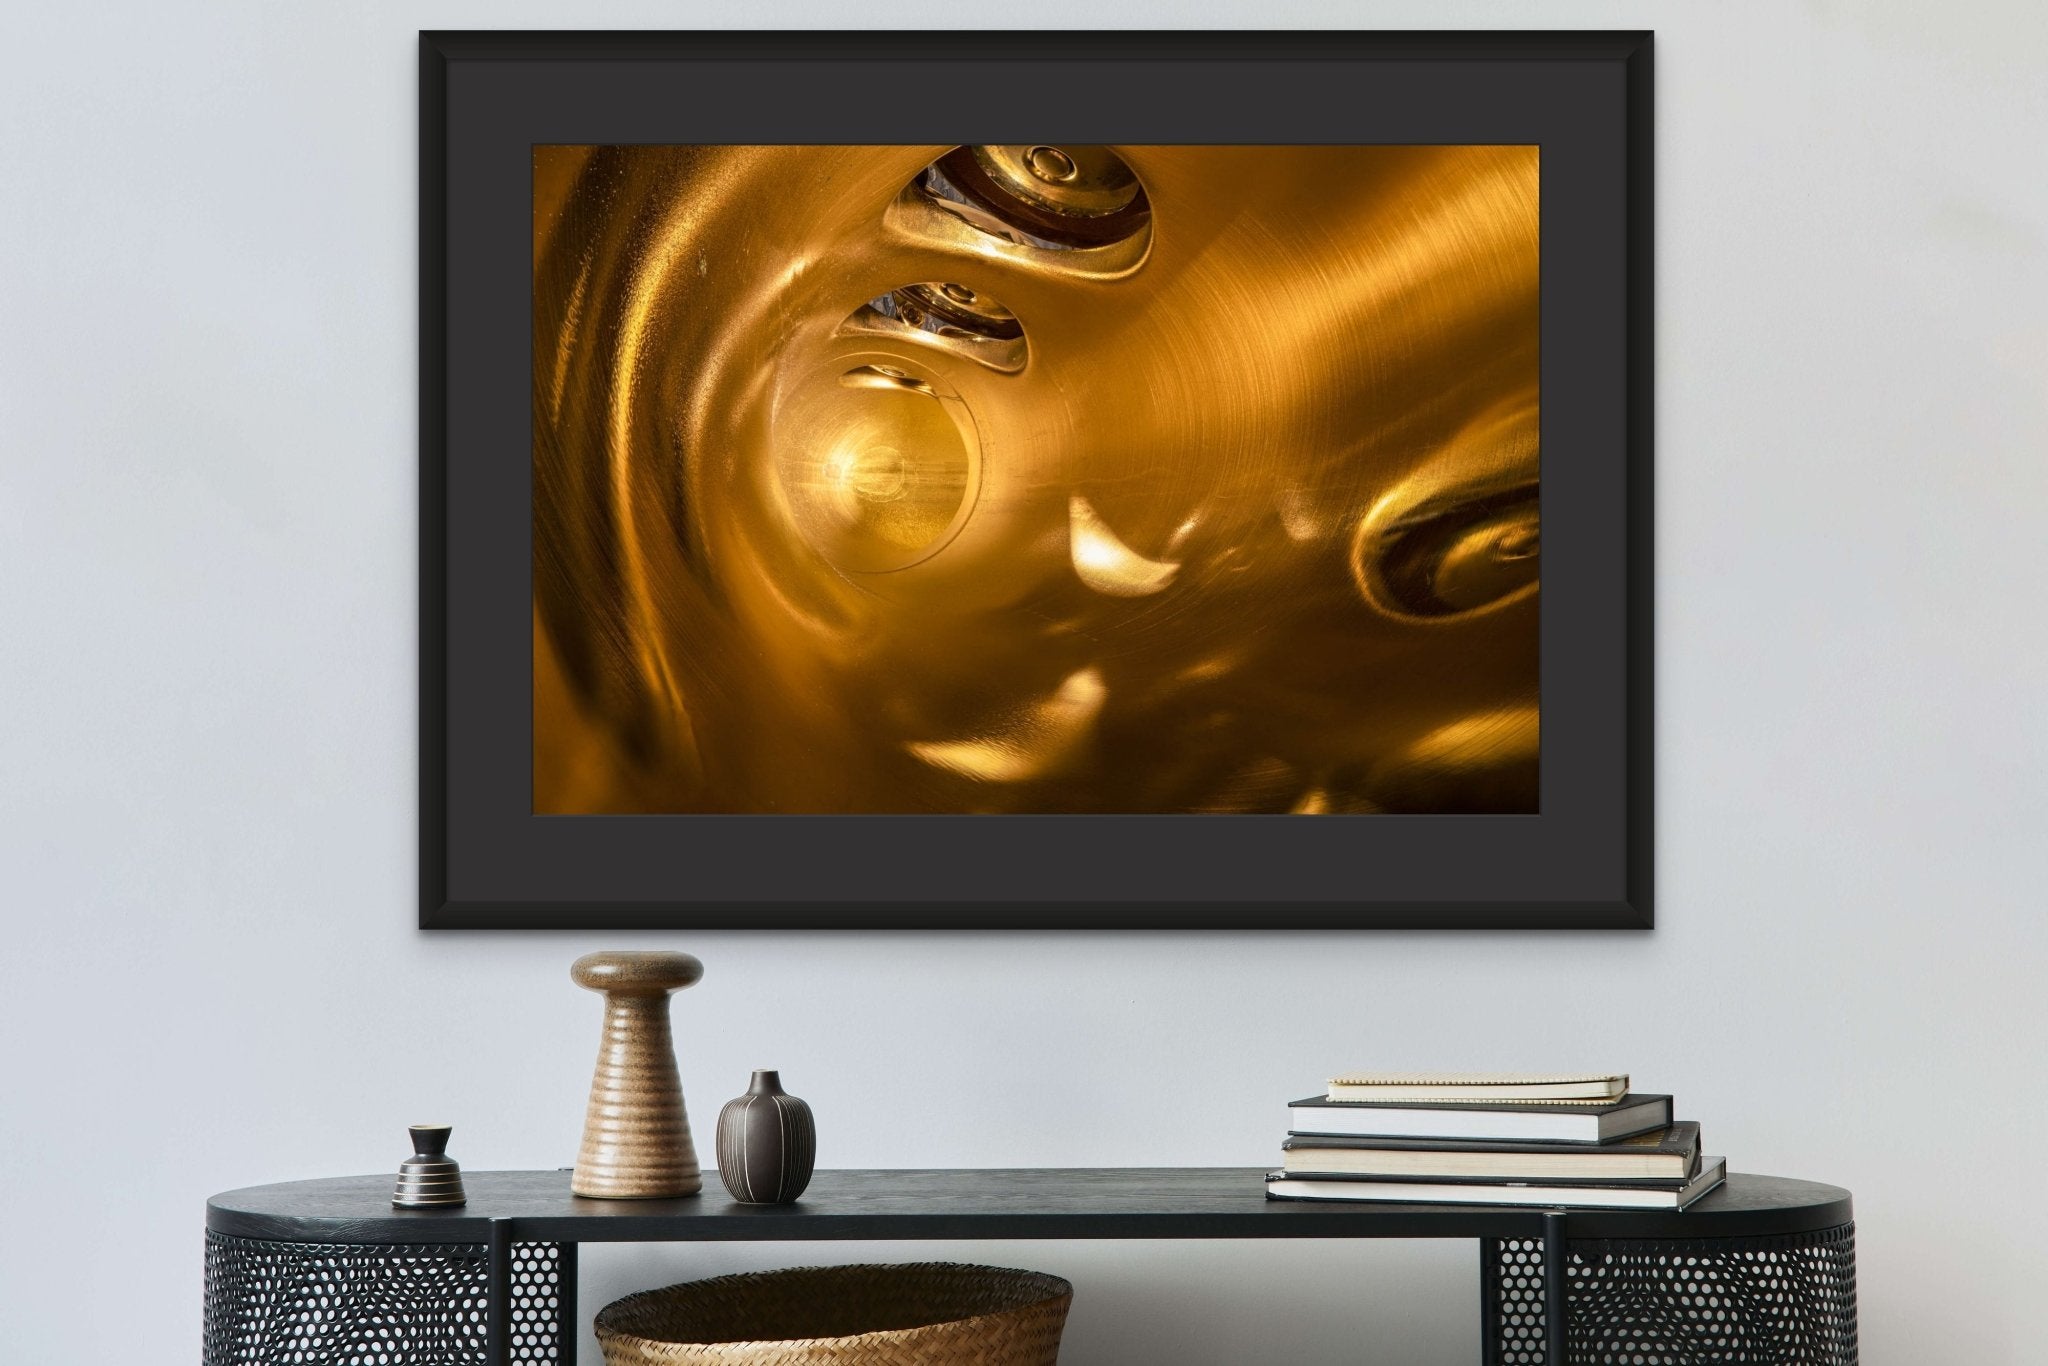 Photo of 2021 Selmer Saxophone. Signed Limited Edition Museum Quality Print. - Giclée Museum Quality Print - Architecture In Music